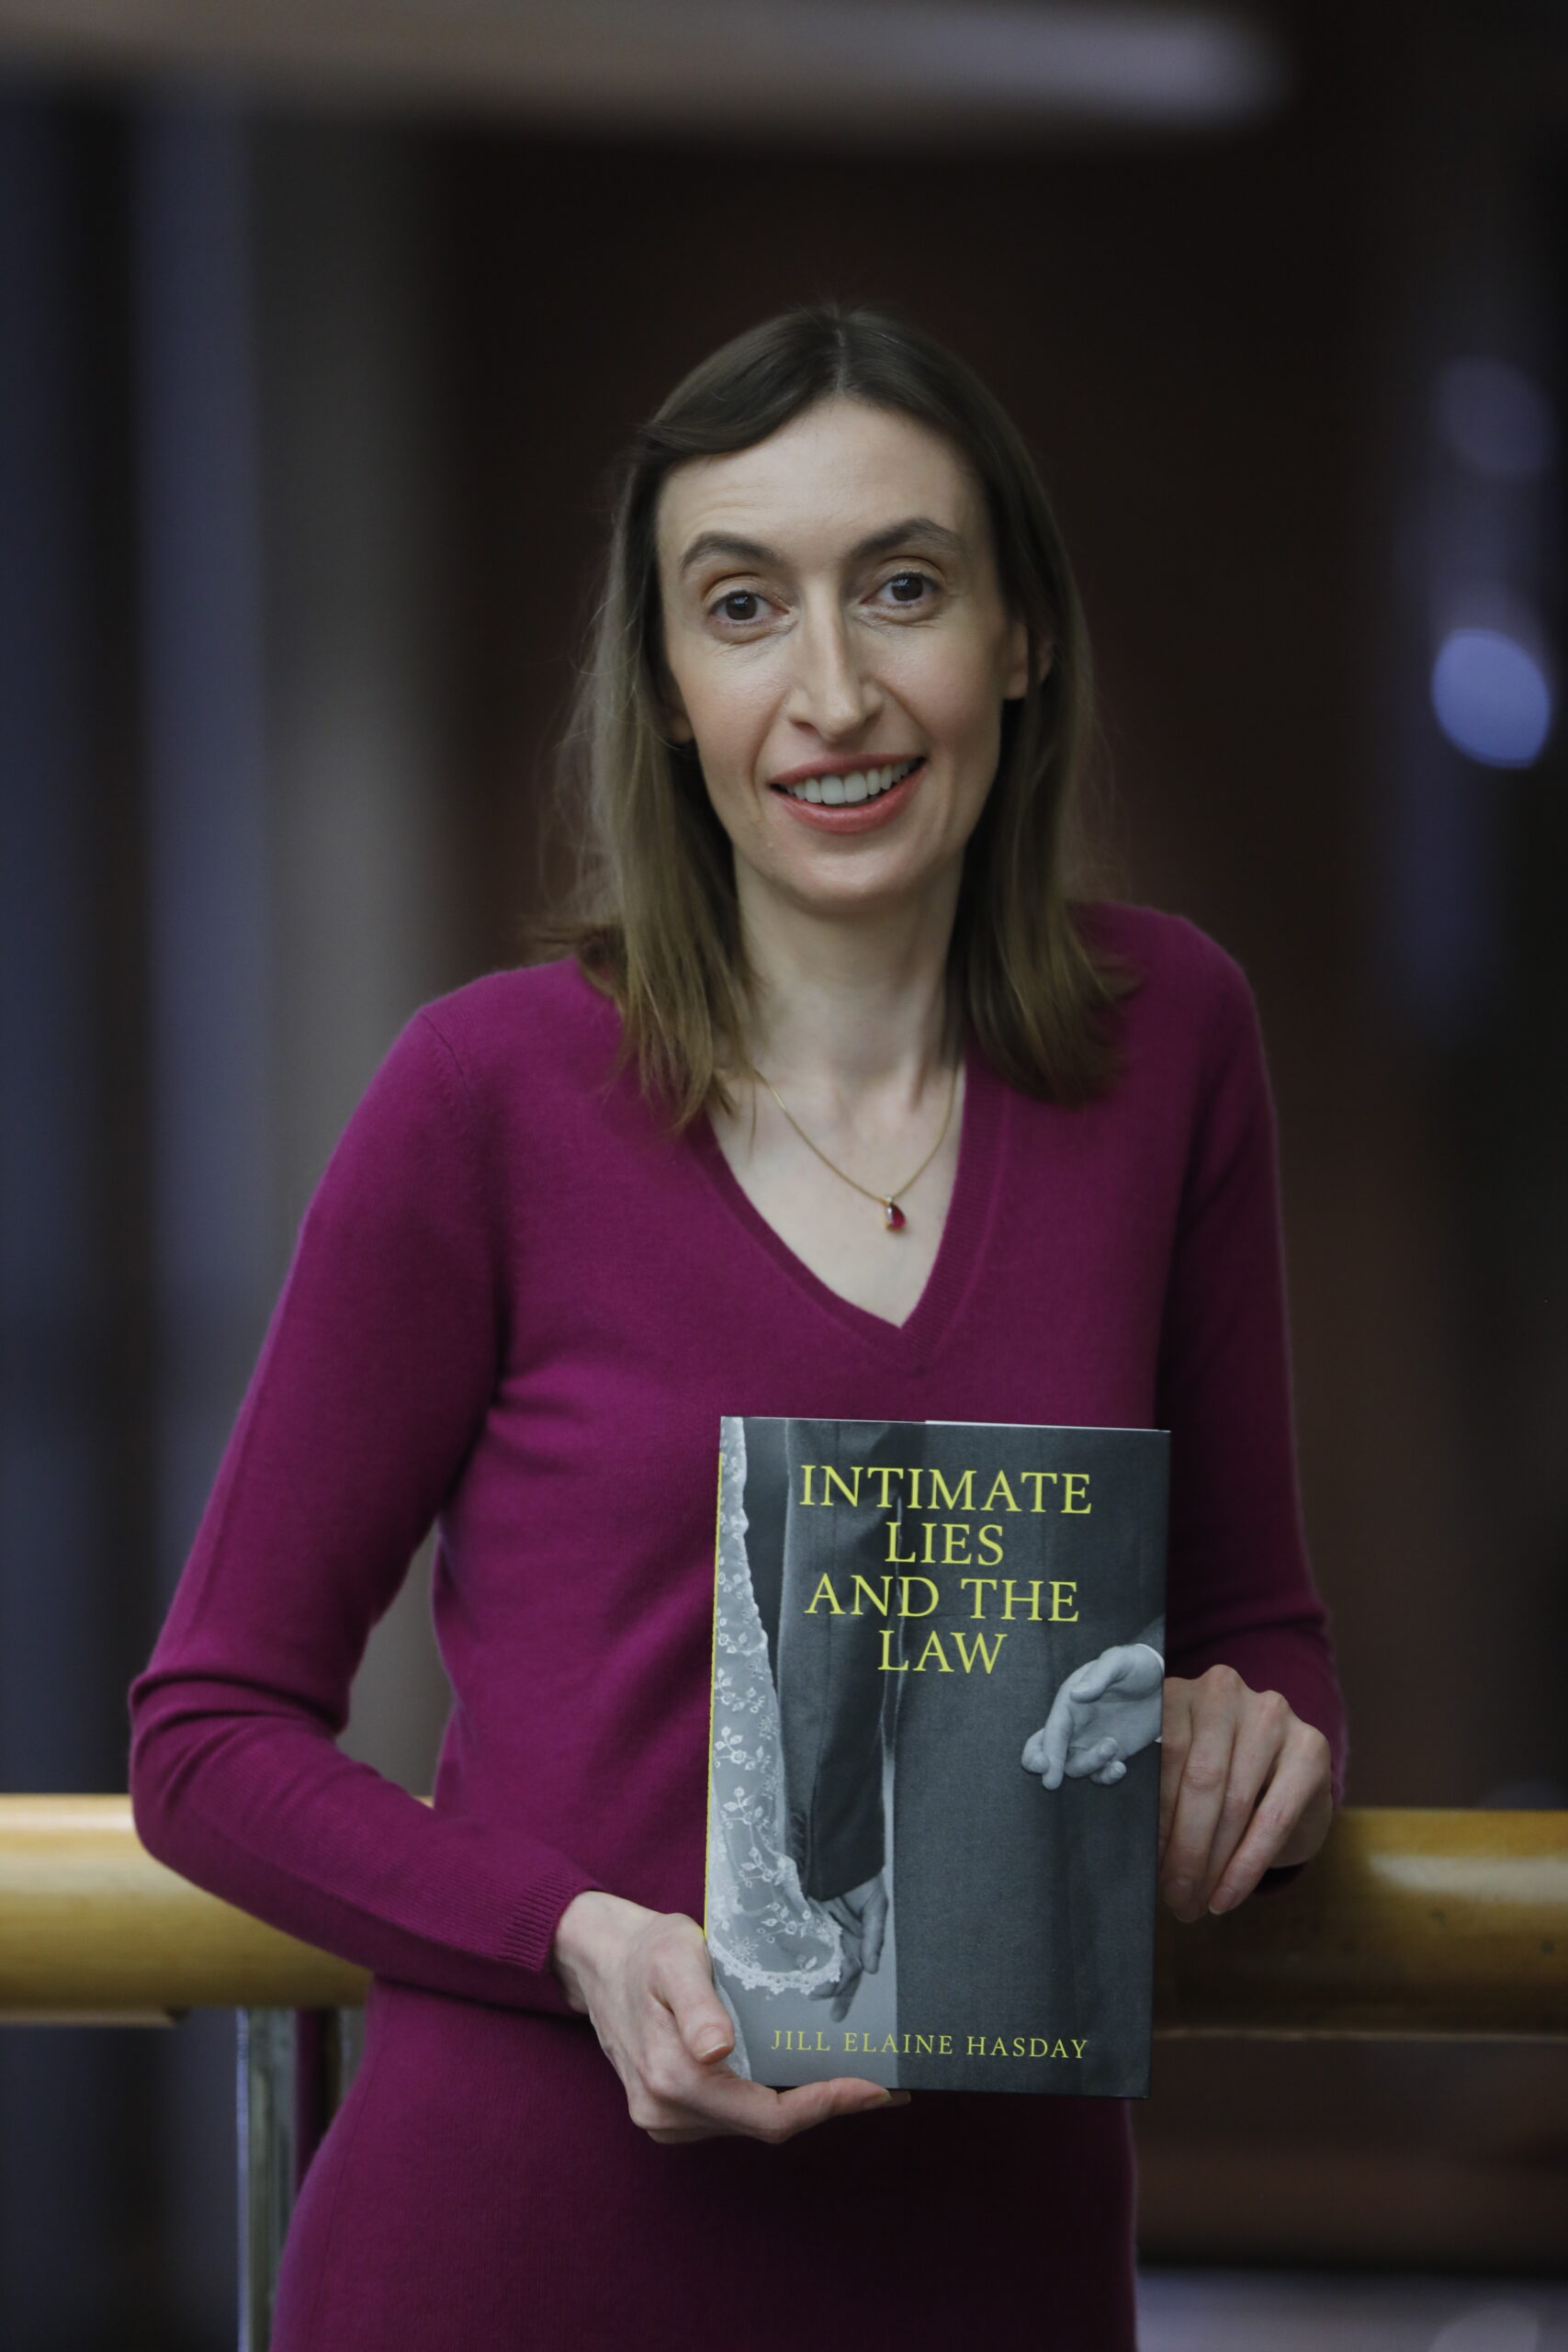 Professor Hasday holding a copy of her book "Intimate Lies and the Law"